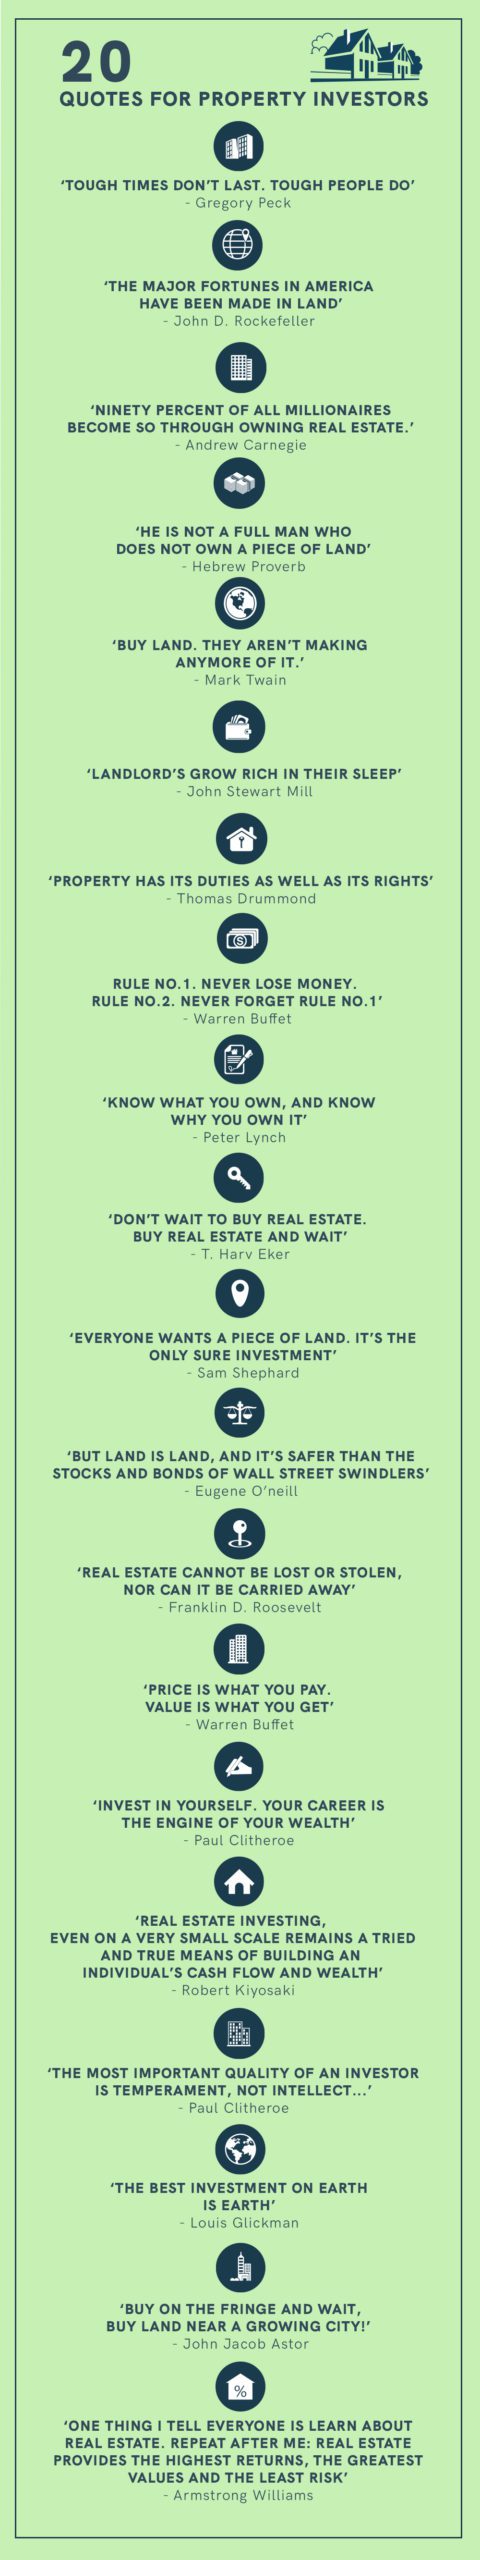 20 Quotes for Property Investors infographic